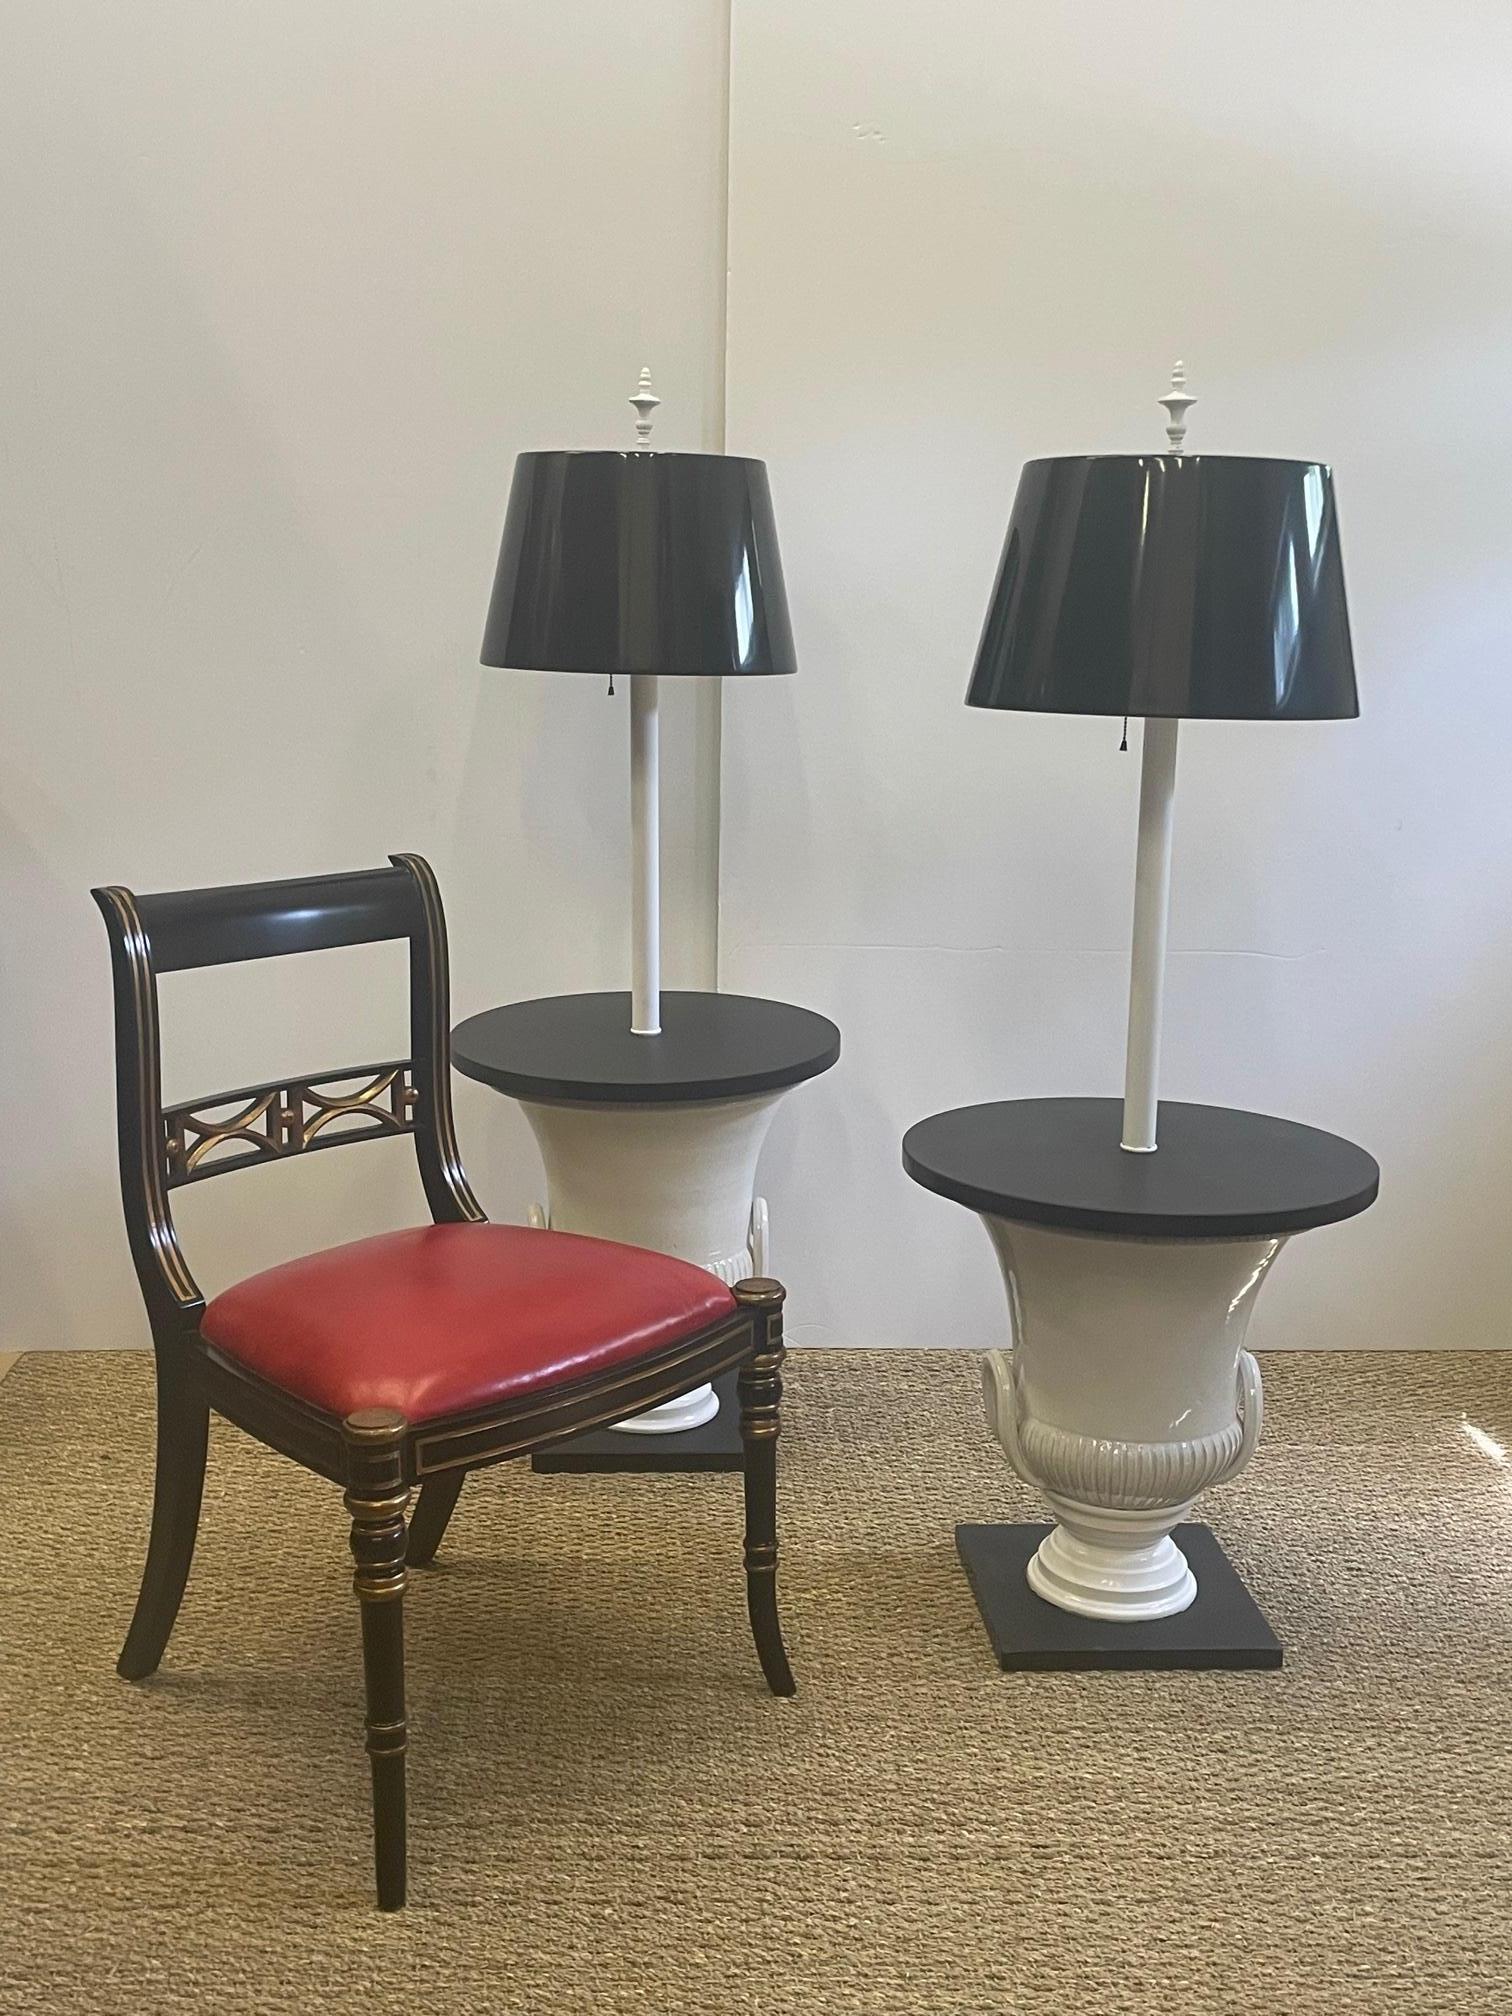 Chic Dorothy Draper style black and white floor lamps side tables having white ceramic urn shaped bases, black slate round table tops and square bases, and custom black tole shades.
Shades are 15.75 diameter at bottom 12